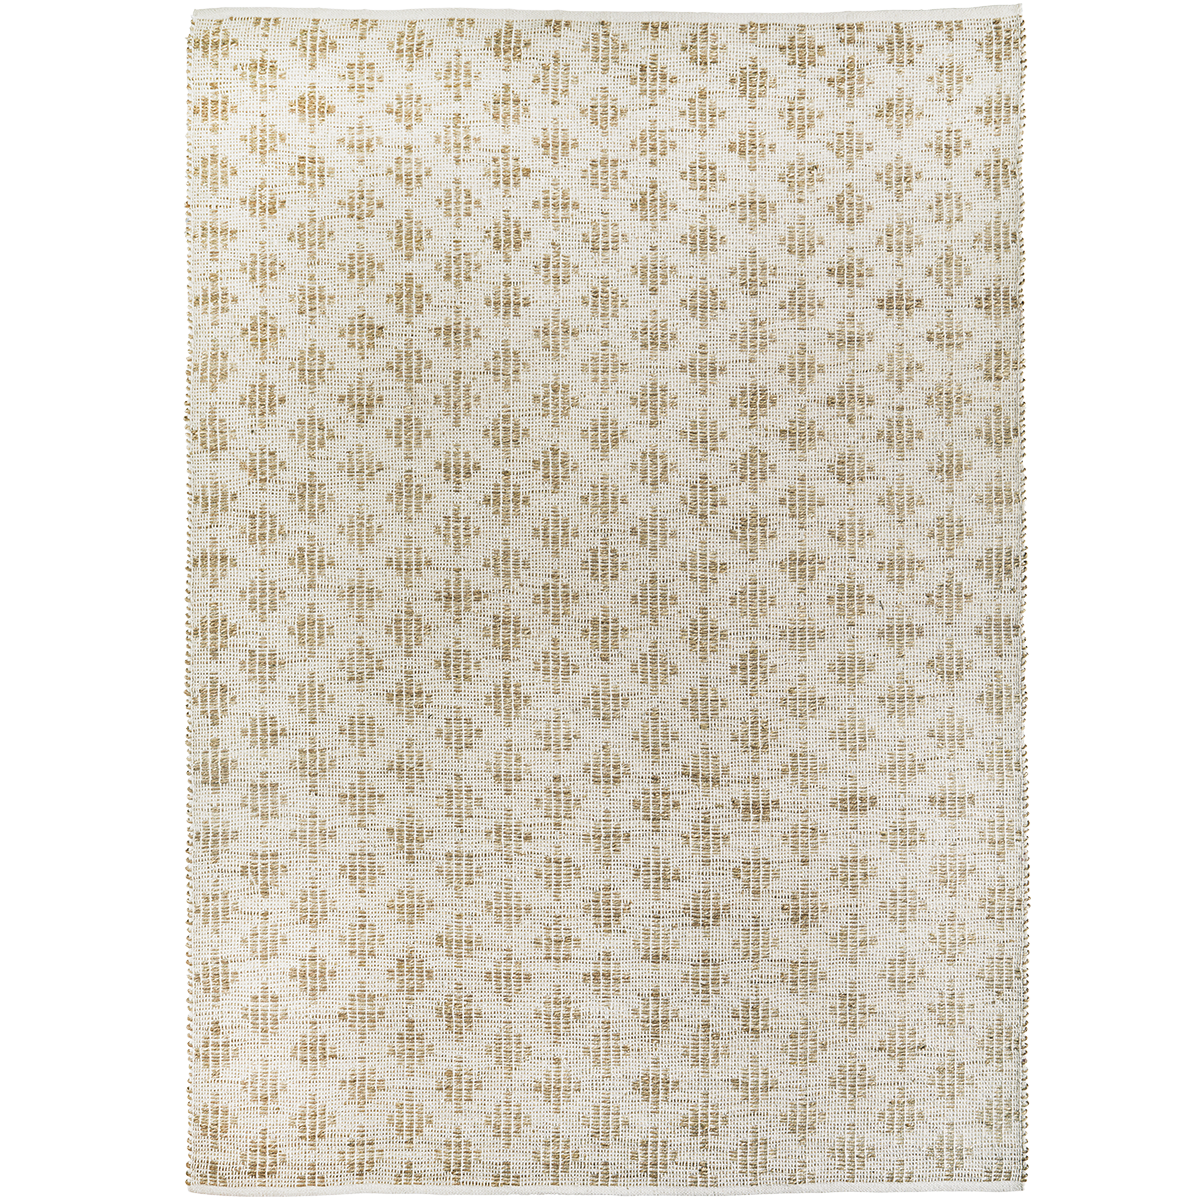 Handwoven seagrass rug w/ cotton